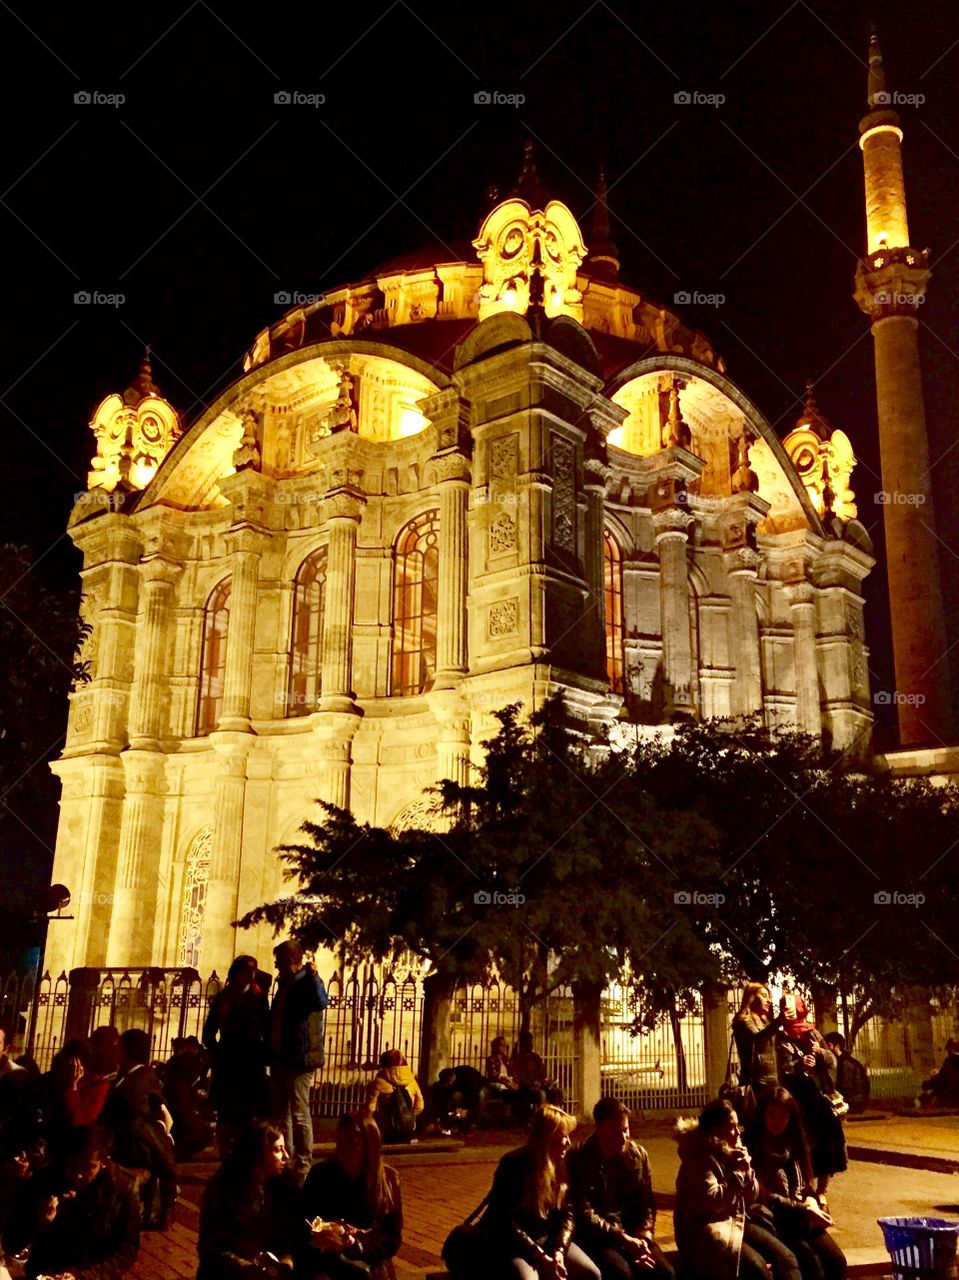 Magnificient Architecture in Istanbul